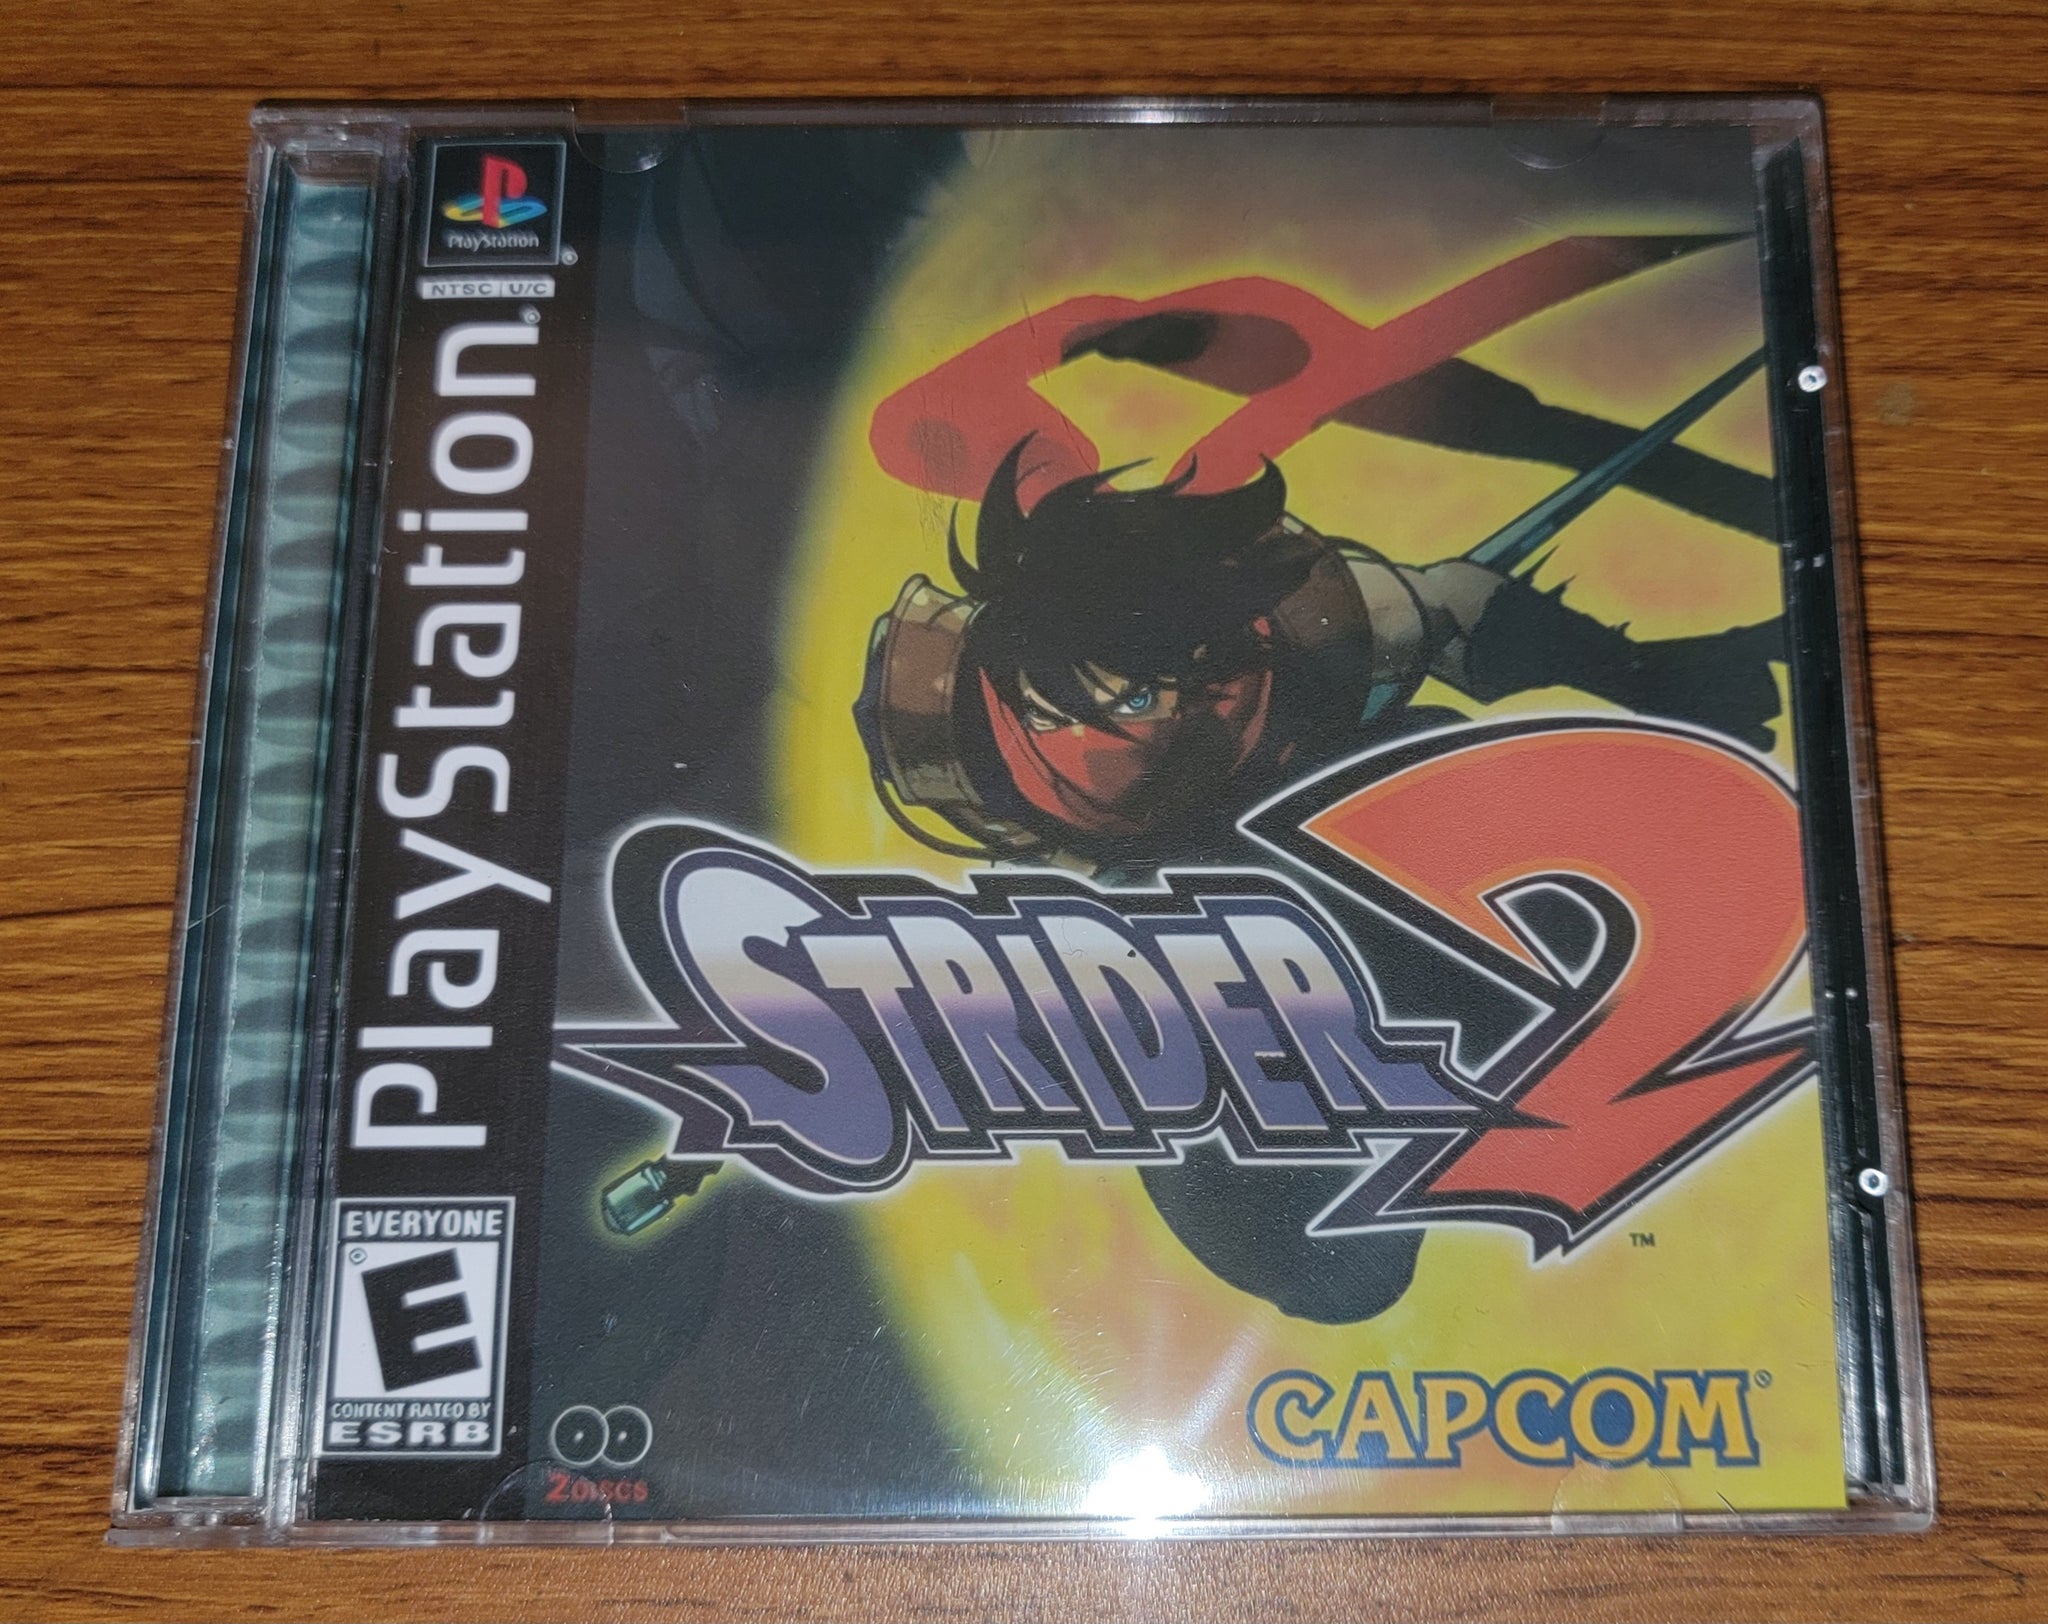 Strider 2 Playstation Reproduction